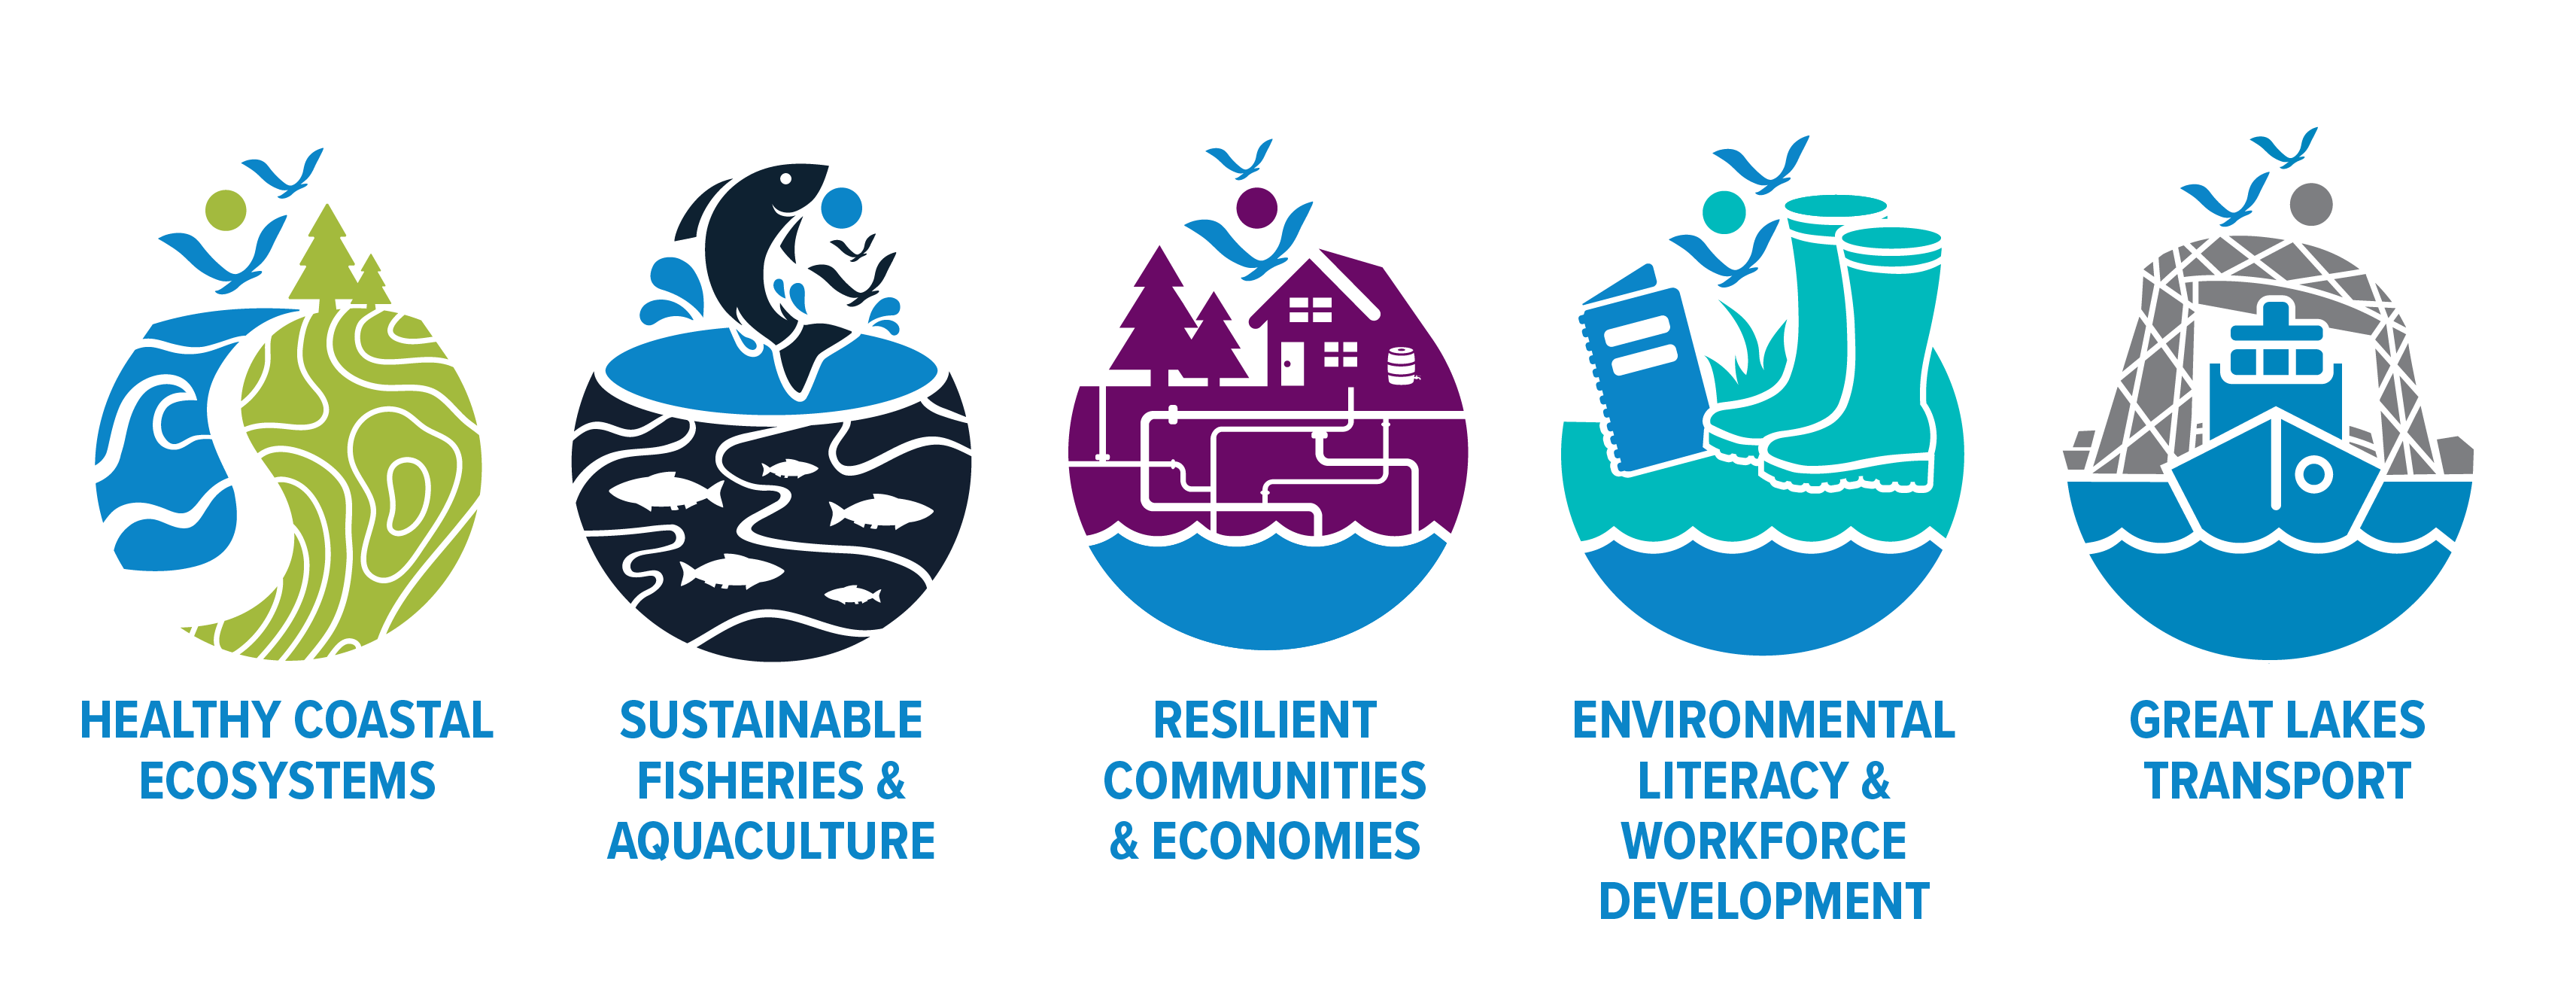 Icons for five Sea grant focus areas: Healthy coastal ecosystems, sustainable fisheries and aquaculture, resilient communities and economics, environmental literacy and workforce development, and great lakes transport